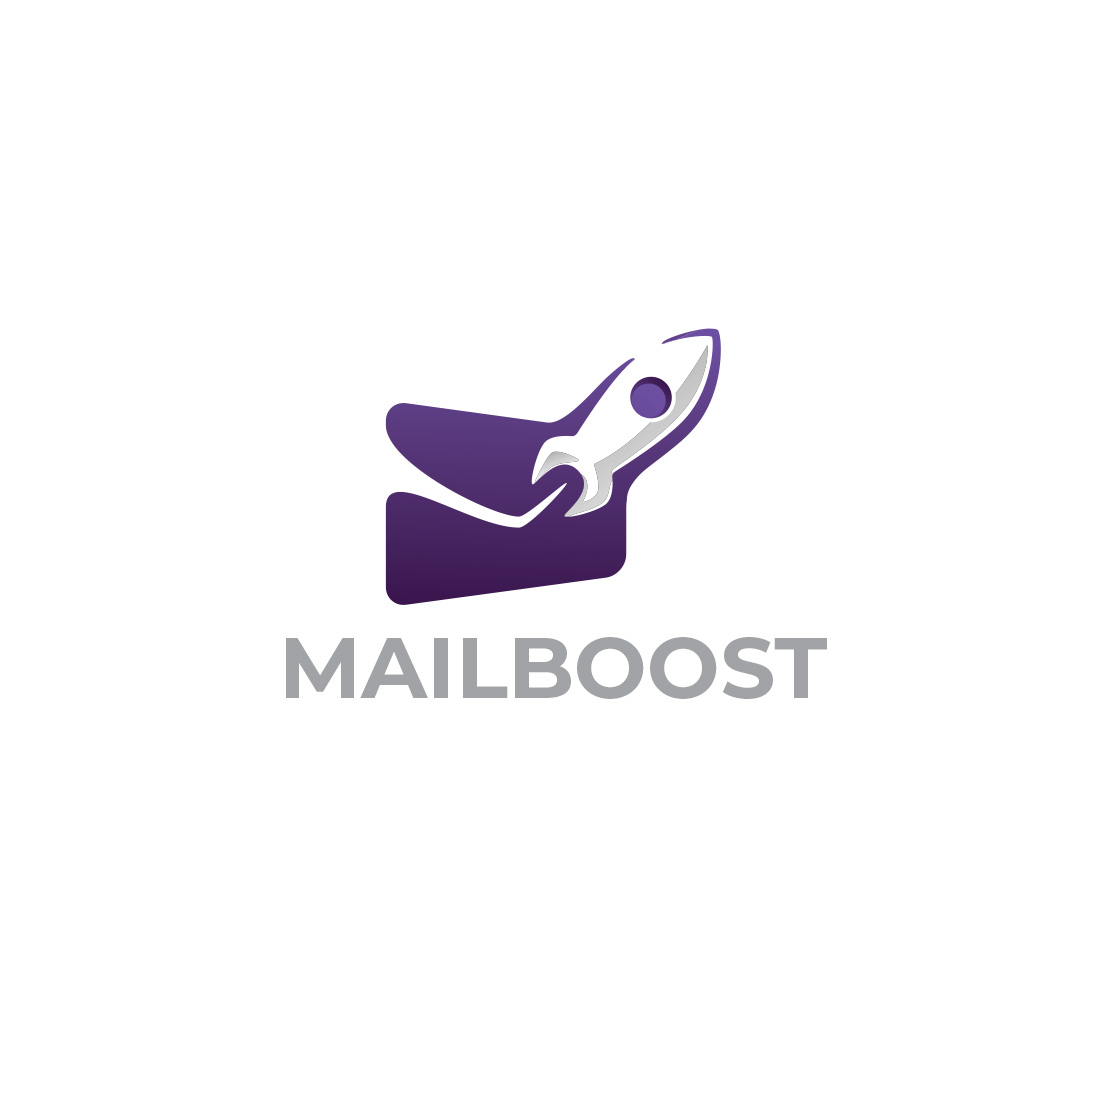 Mail Boost cover image.